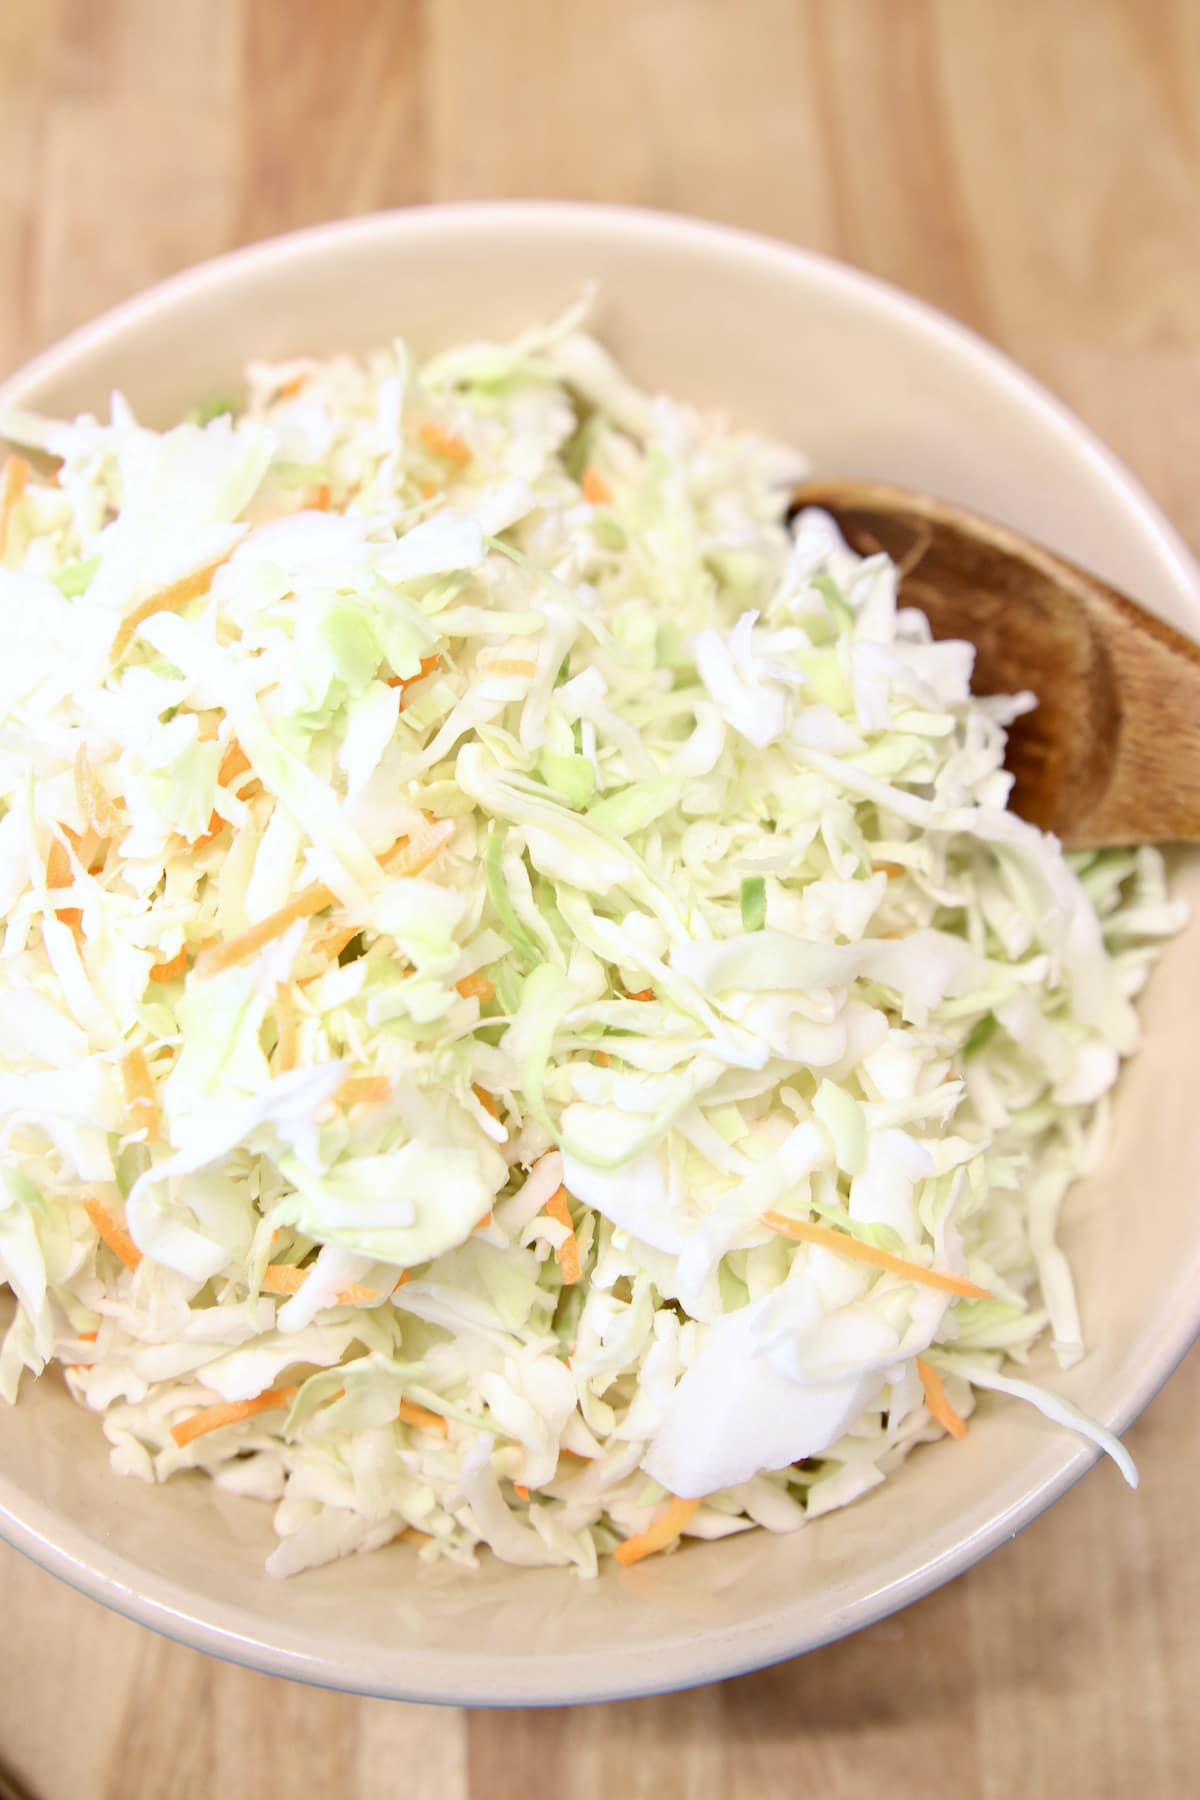 slaw mix in a bowl with wood spoon.